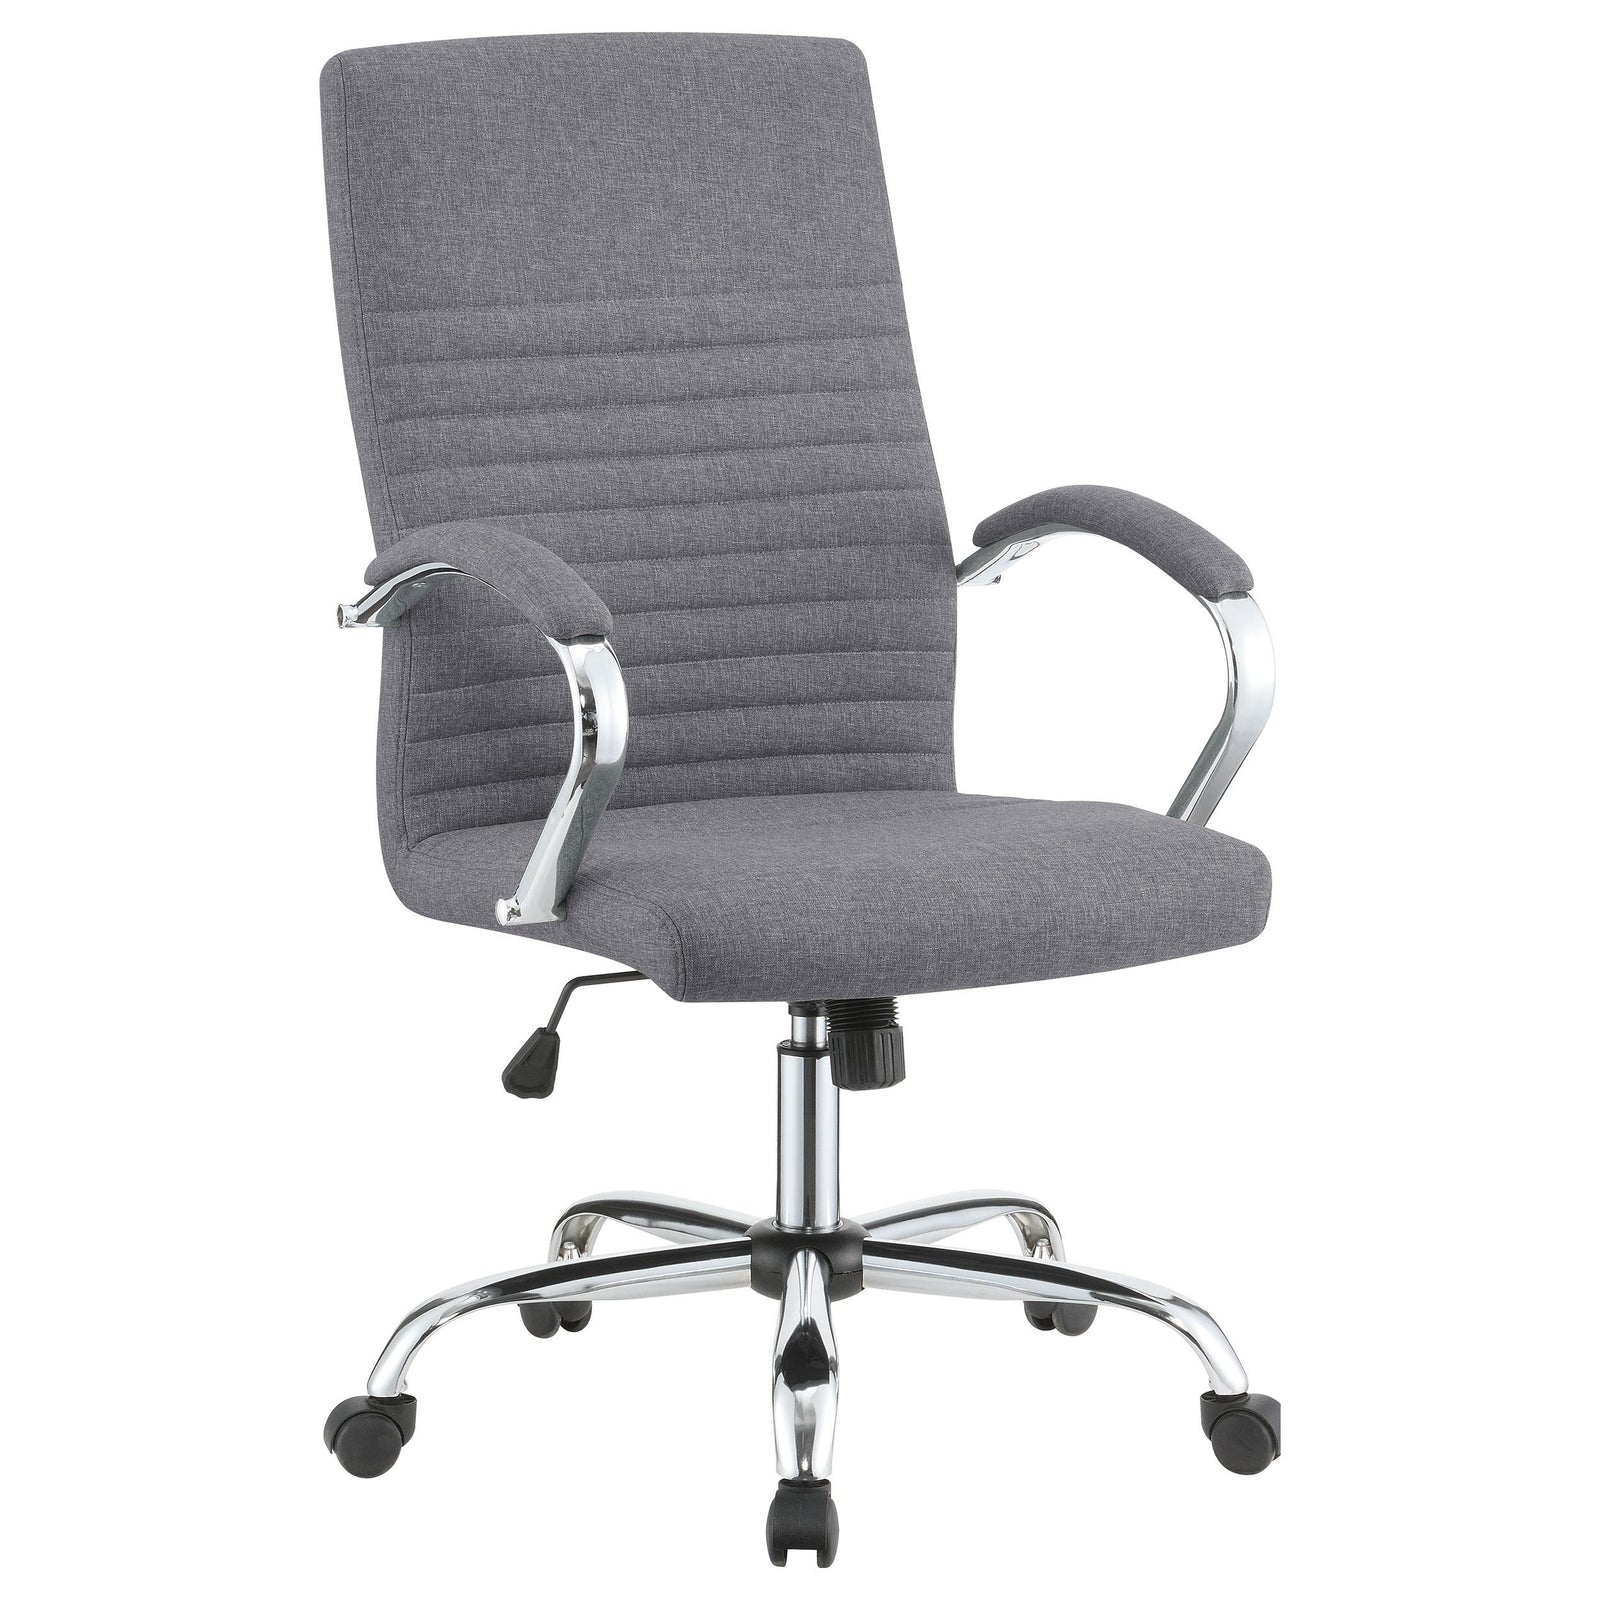 Abisko Upholstered Office Chair with Casters Grey and Chrome image